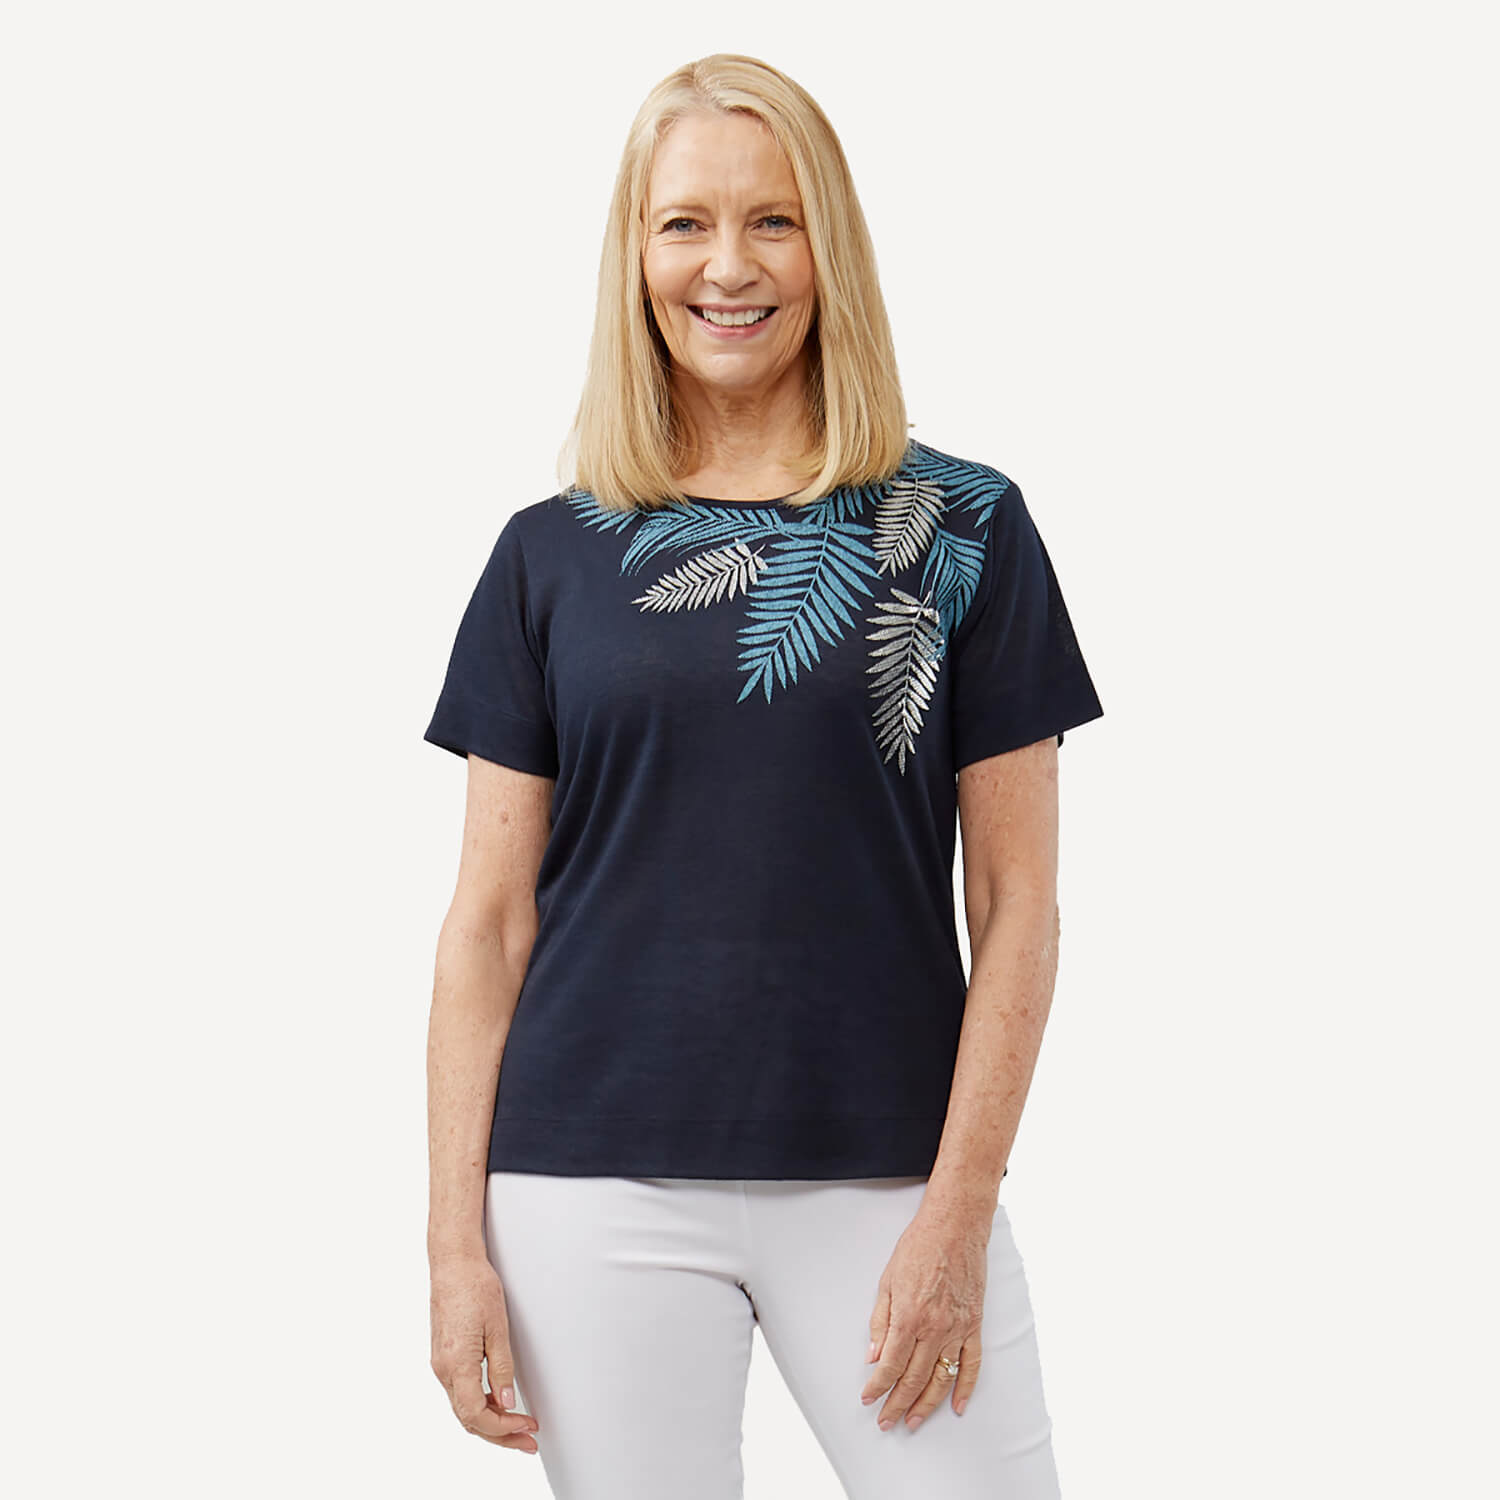 Tigiwear Leaf Print Top - French Navy 1 Shaws Department Stores